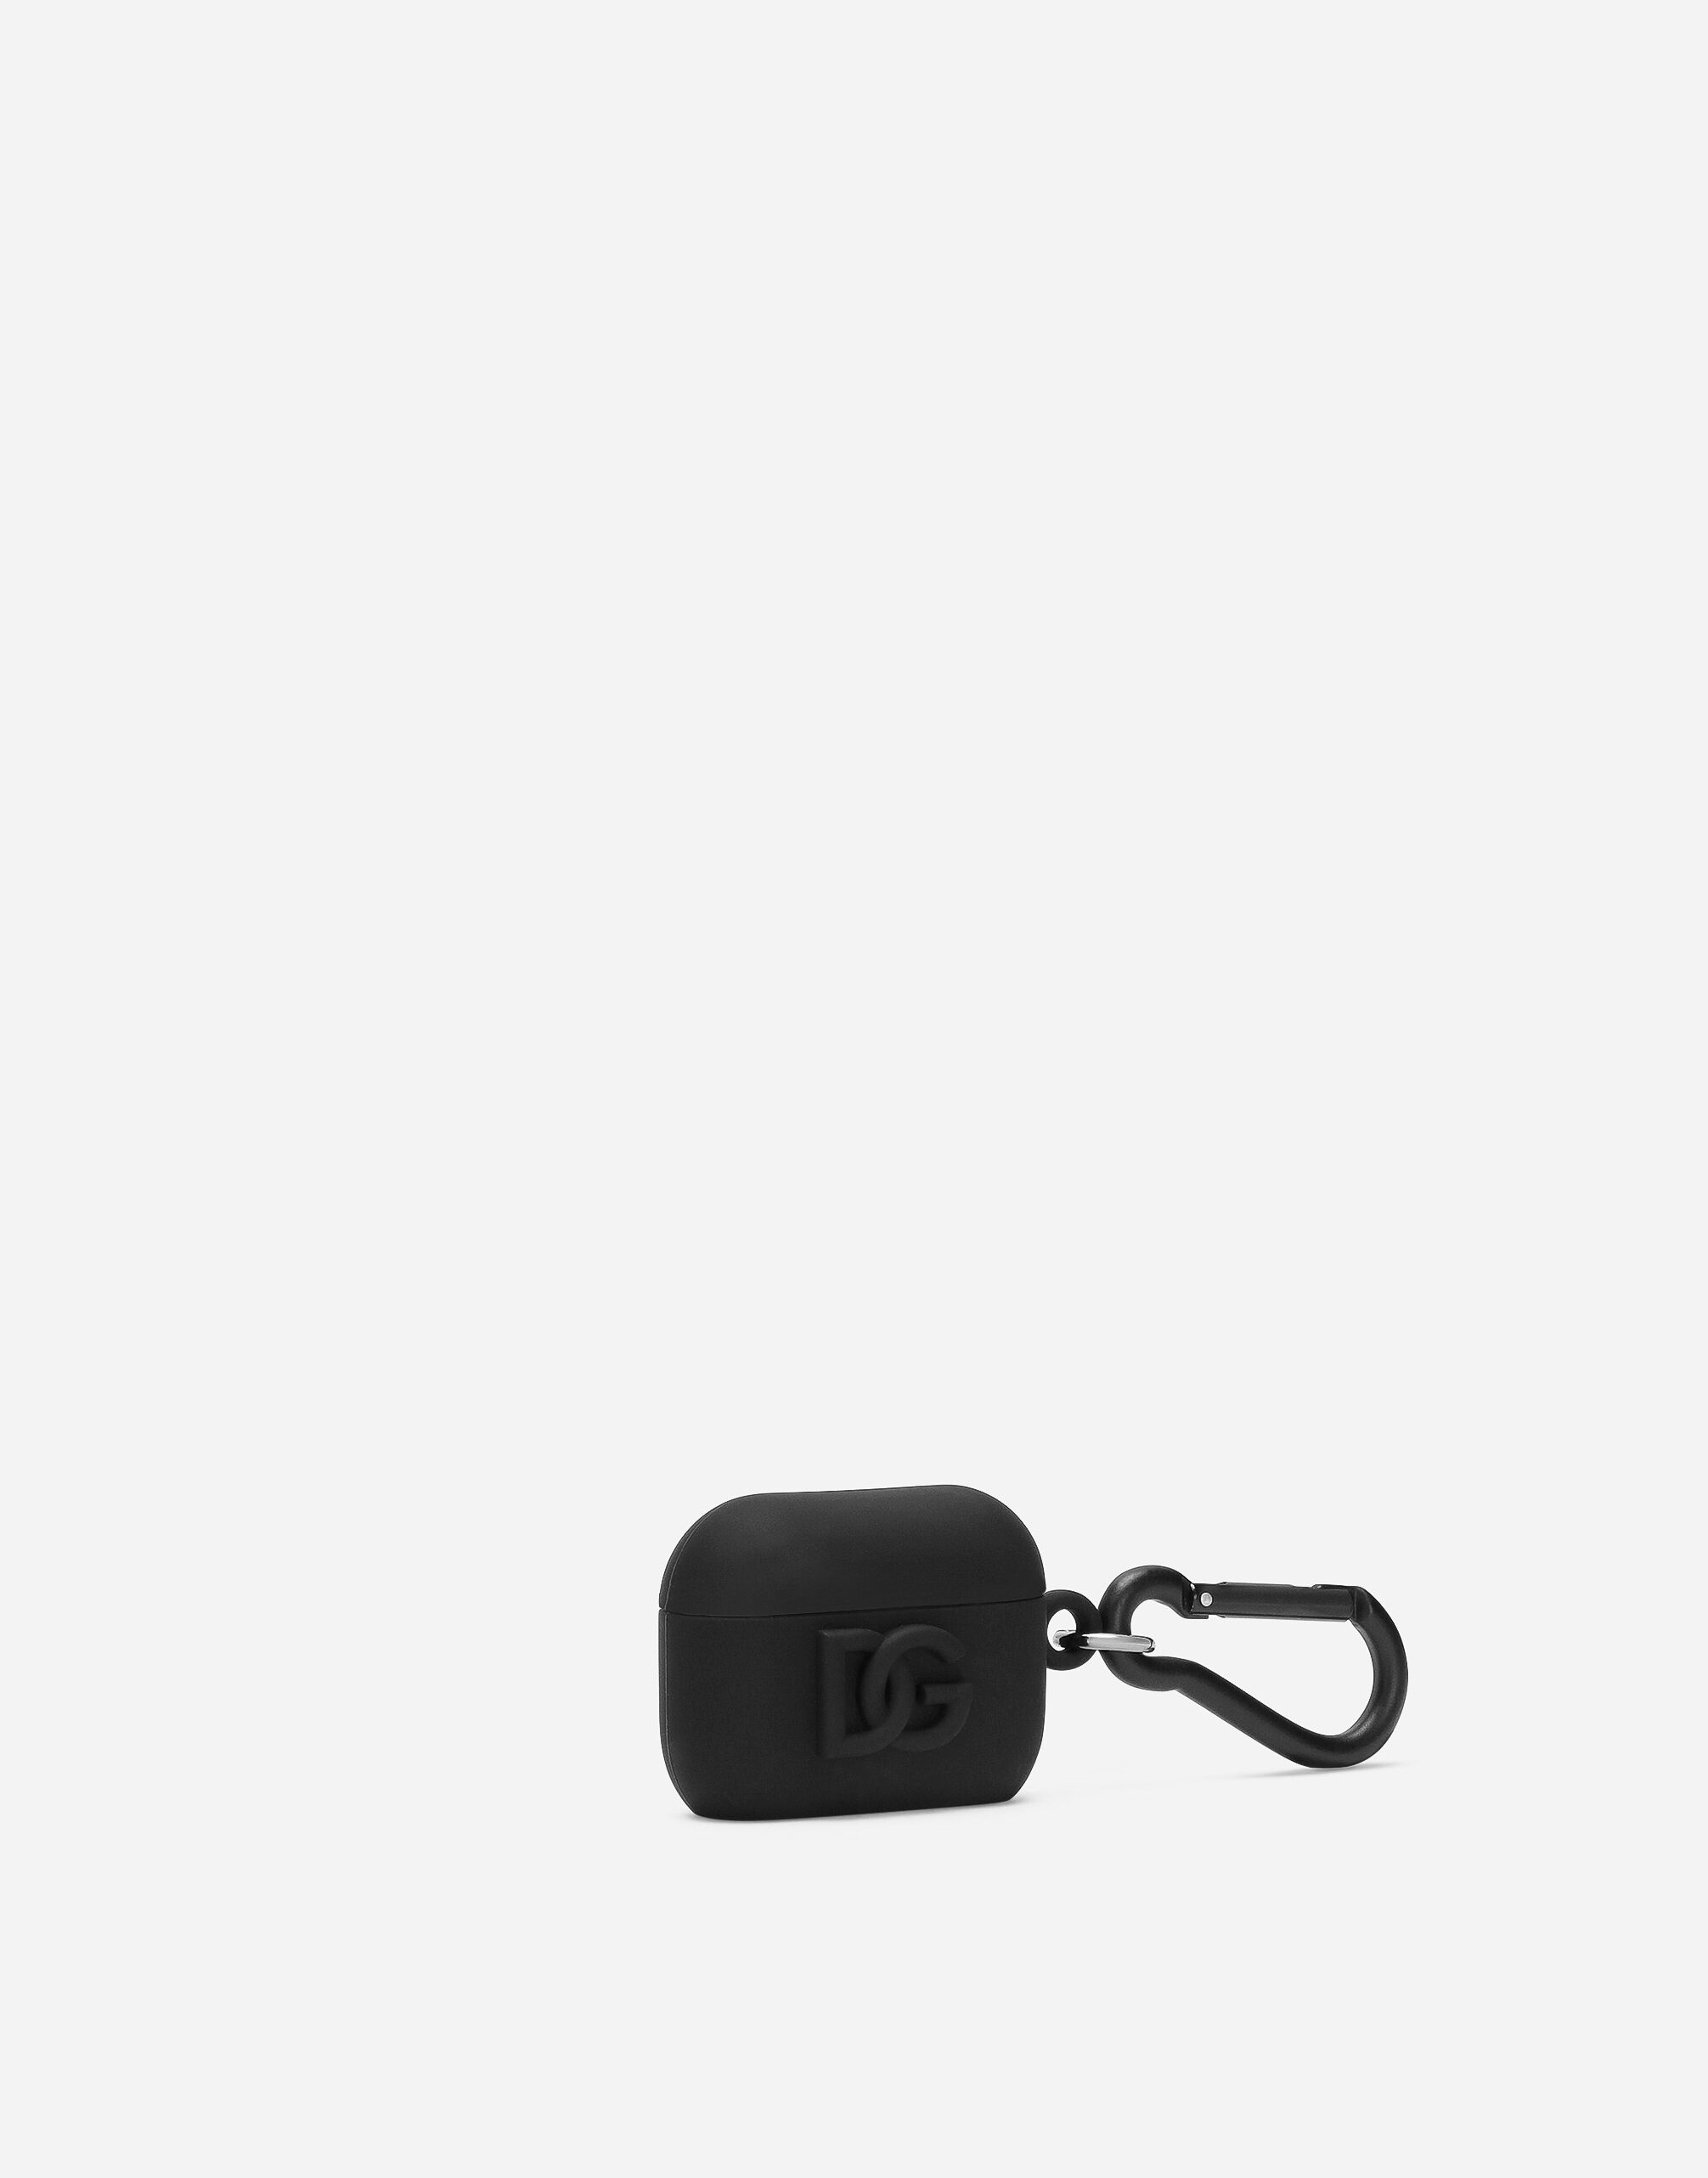 Rubber AirPods case - 2